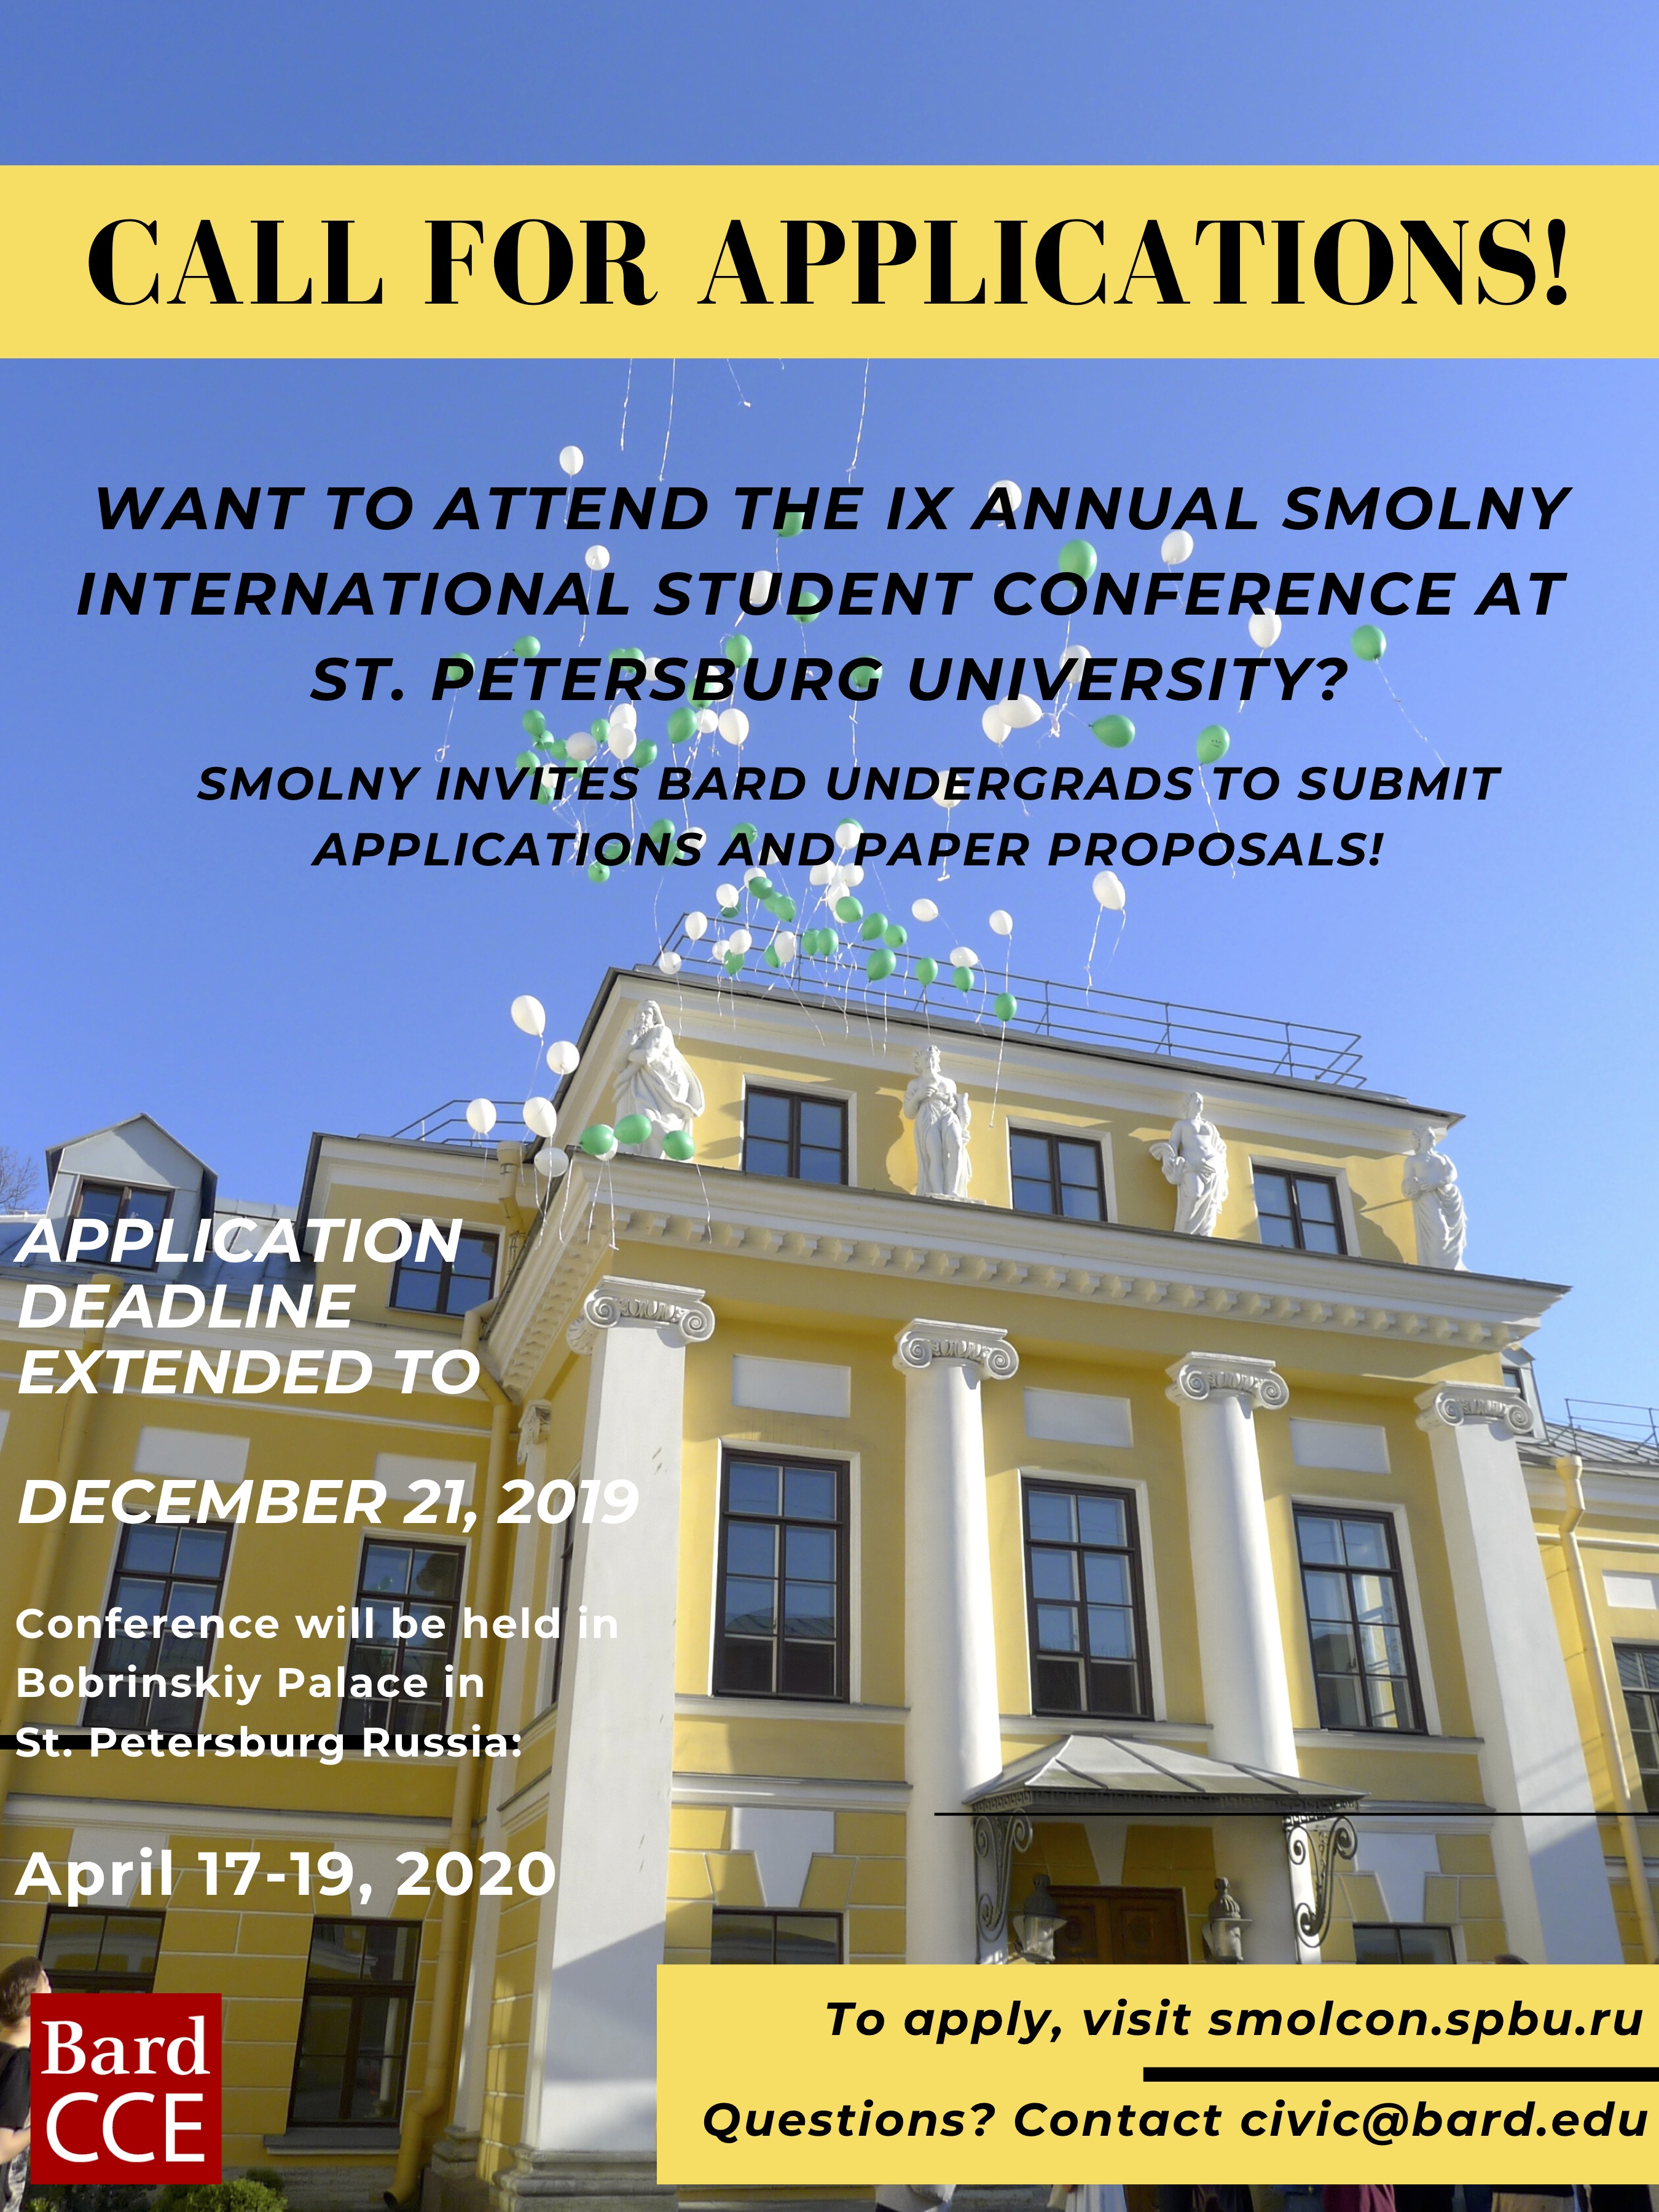 The IX Annual Smolny International Student Conference